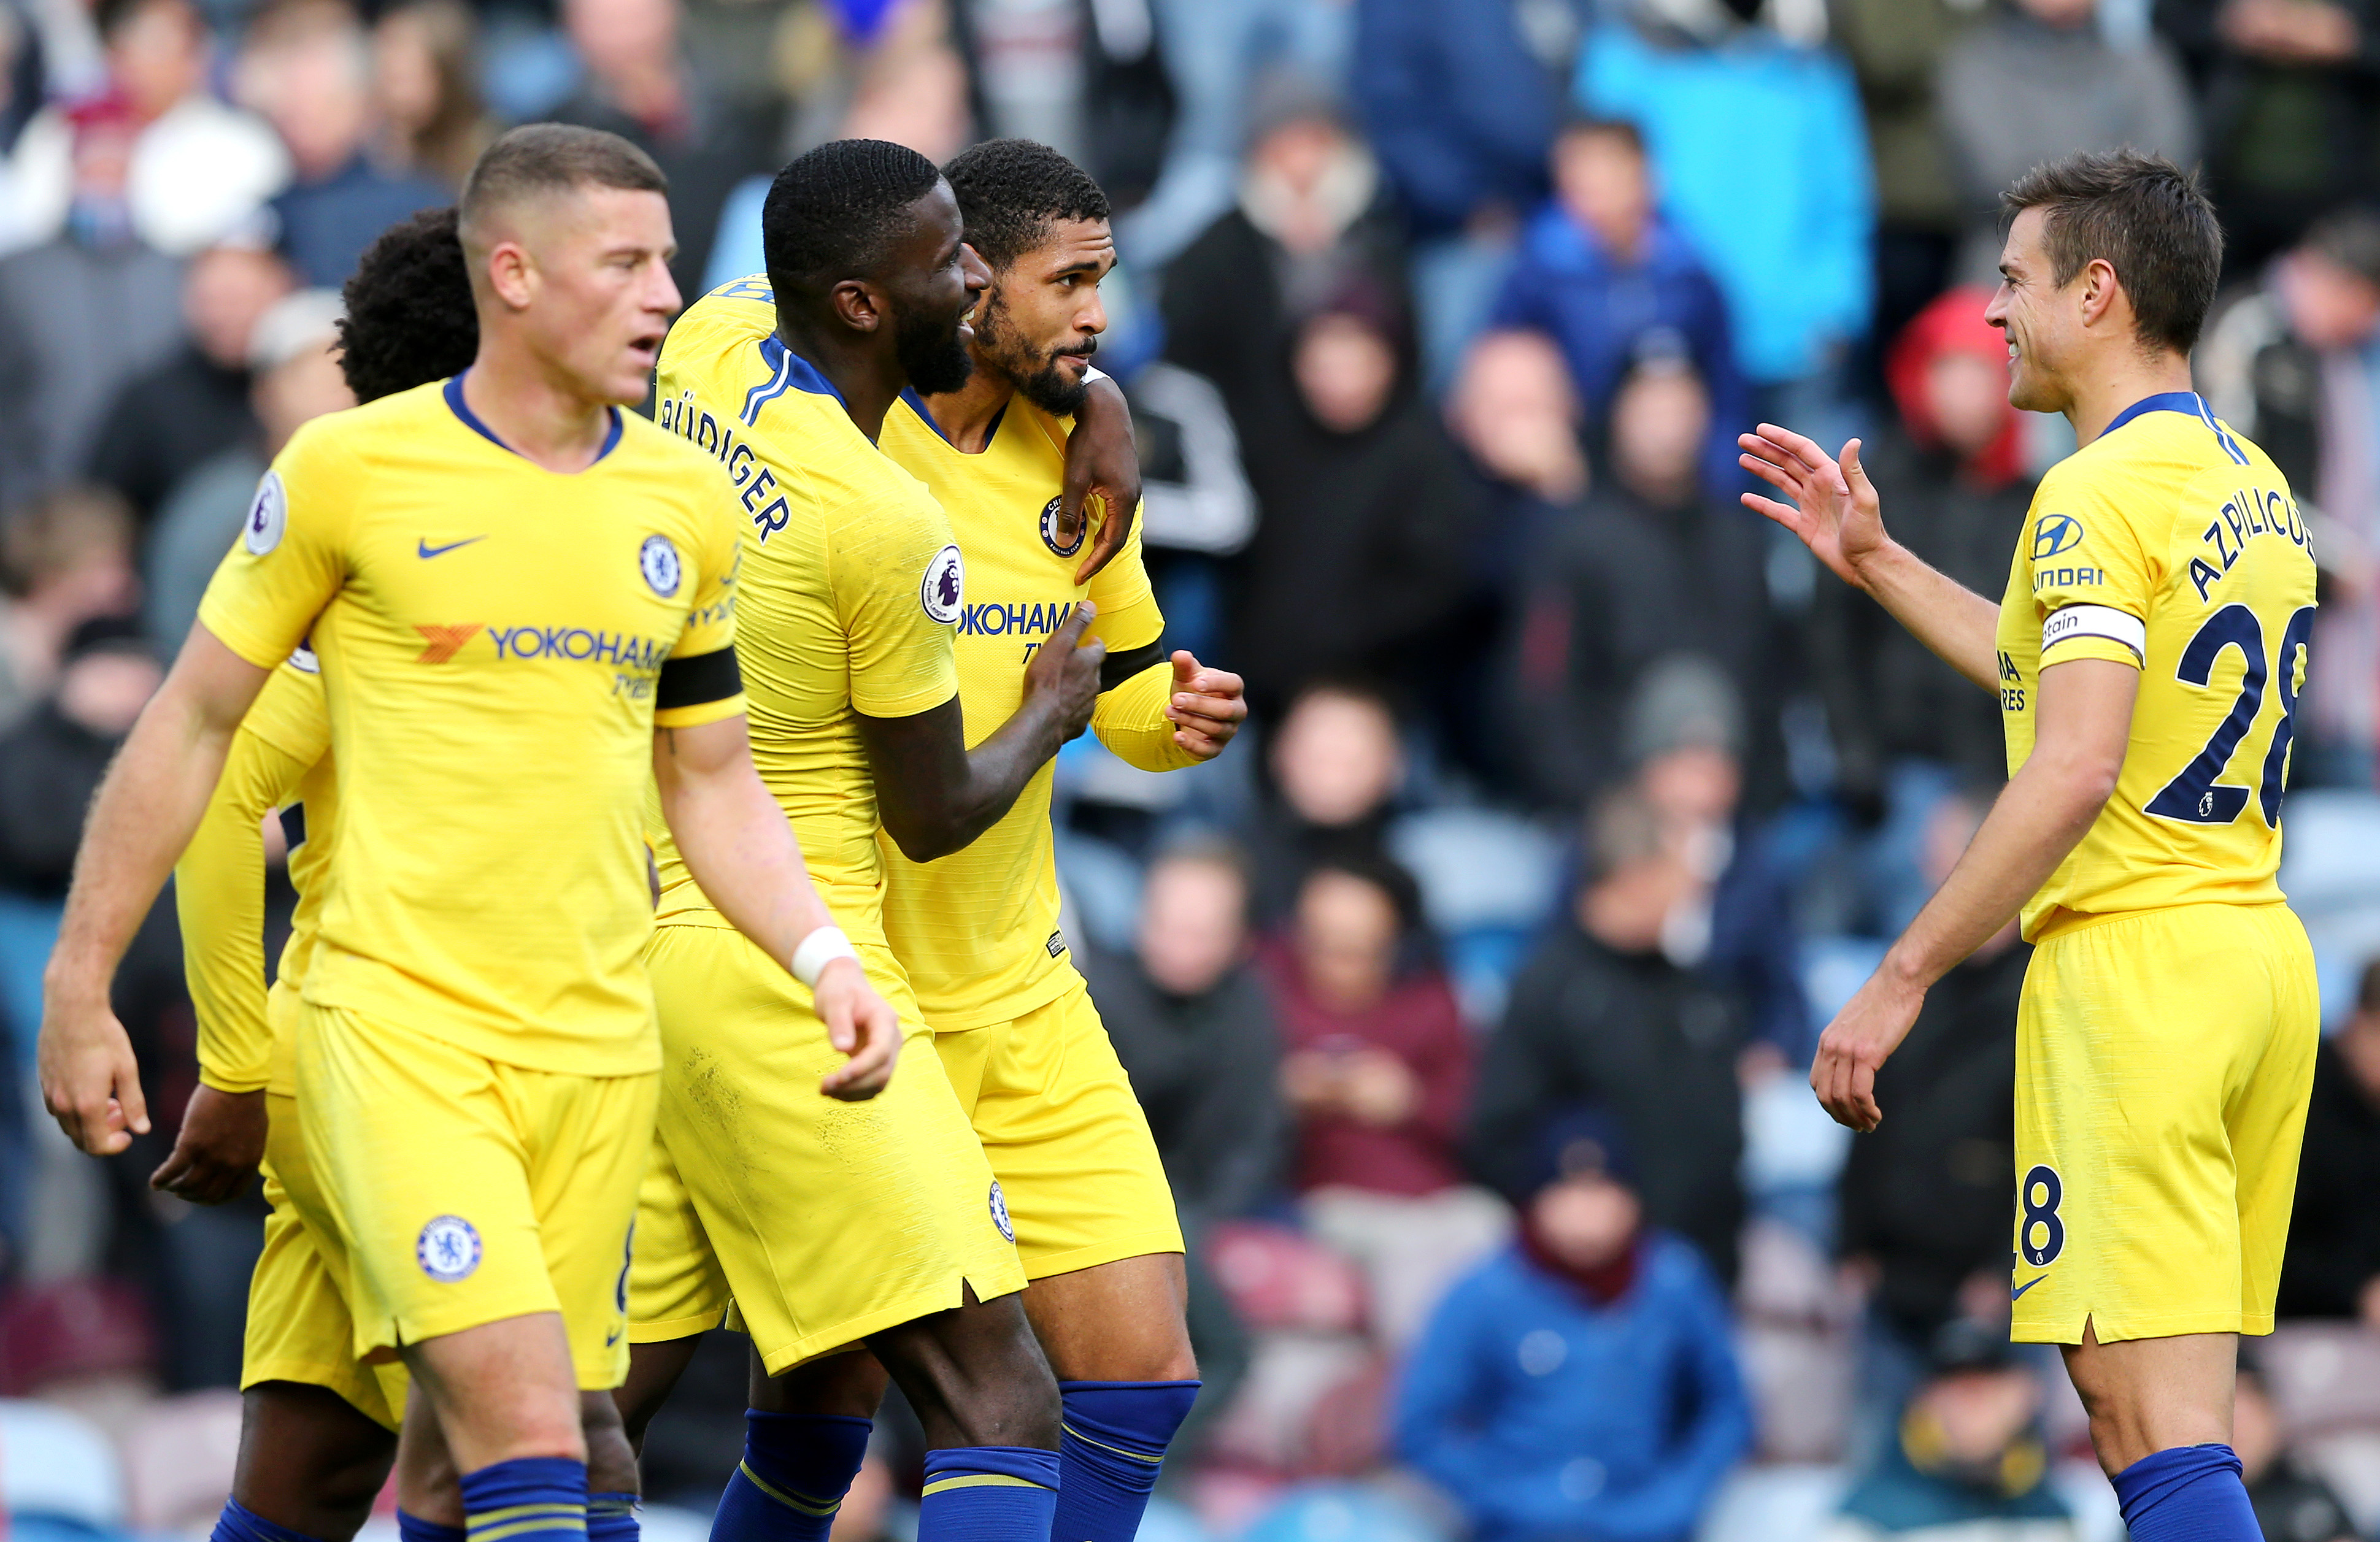 BURNLEY, ENGLAND - OCTOBER 28:  Ruben Loftus-Cheek of Chelsea celebrates with teammates Ross Barkley, Antonio Ruediger and Cesar Azpilicueta after scoring his sides fourth goal during the Premier League match between Burnley FC and Chelsea FC at Turf Moor on October 28, 2018 in Burnley, United Kingdom.  (Photo by Nigel Roddis/Getty Images)